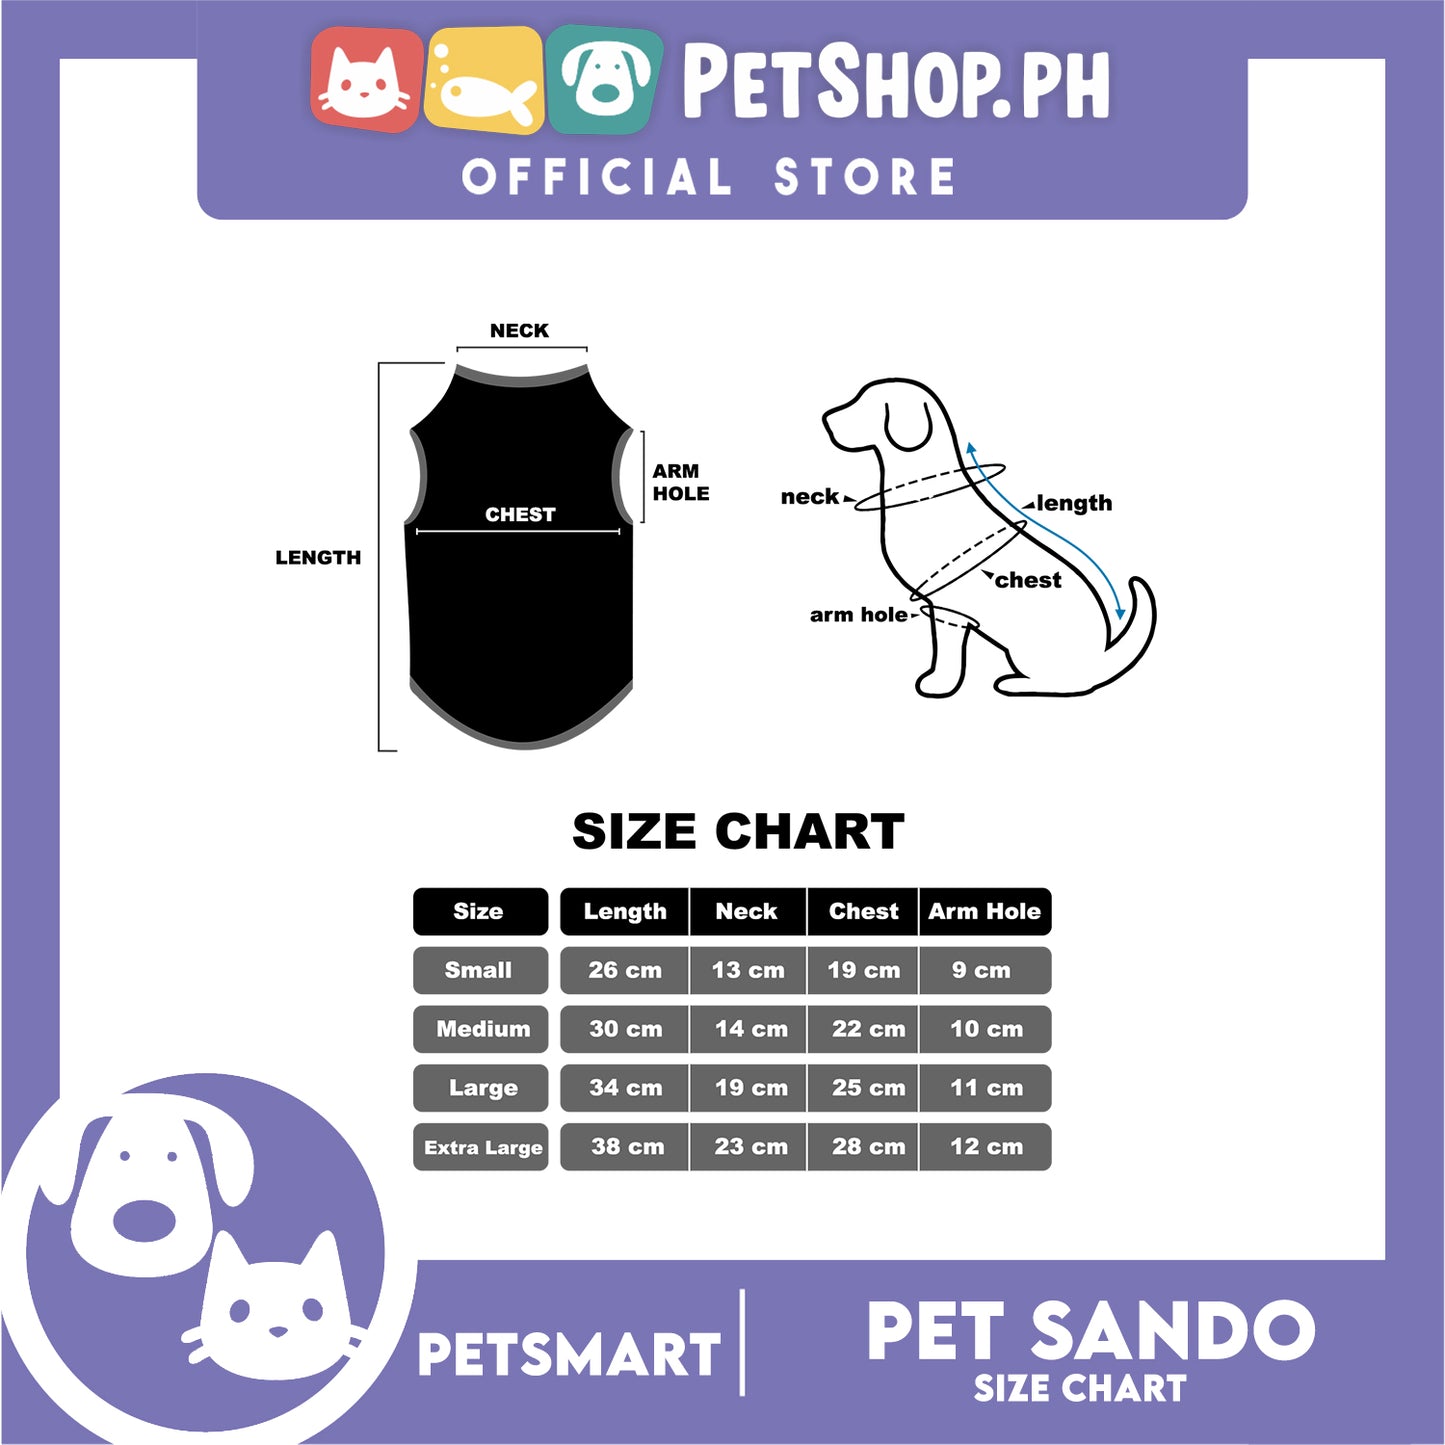 Pet Sando Character Design Print with Green Piping (Small) Perfect Fit for Dogs and Cats